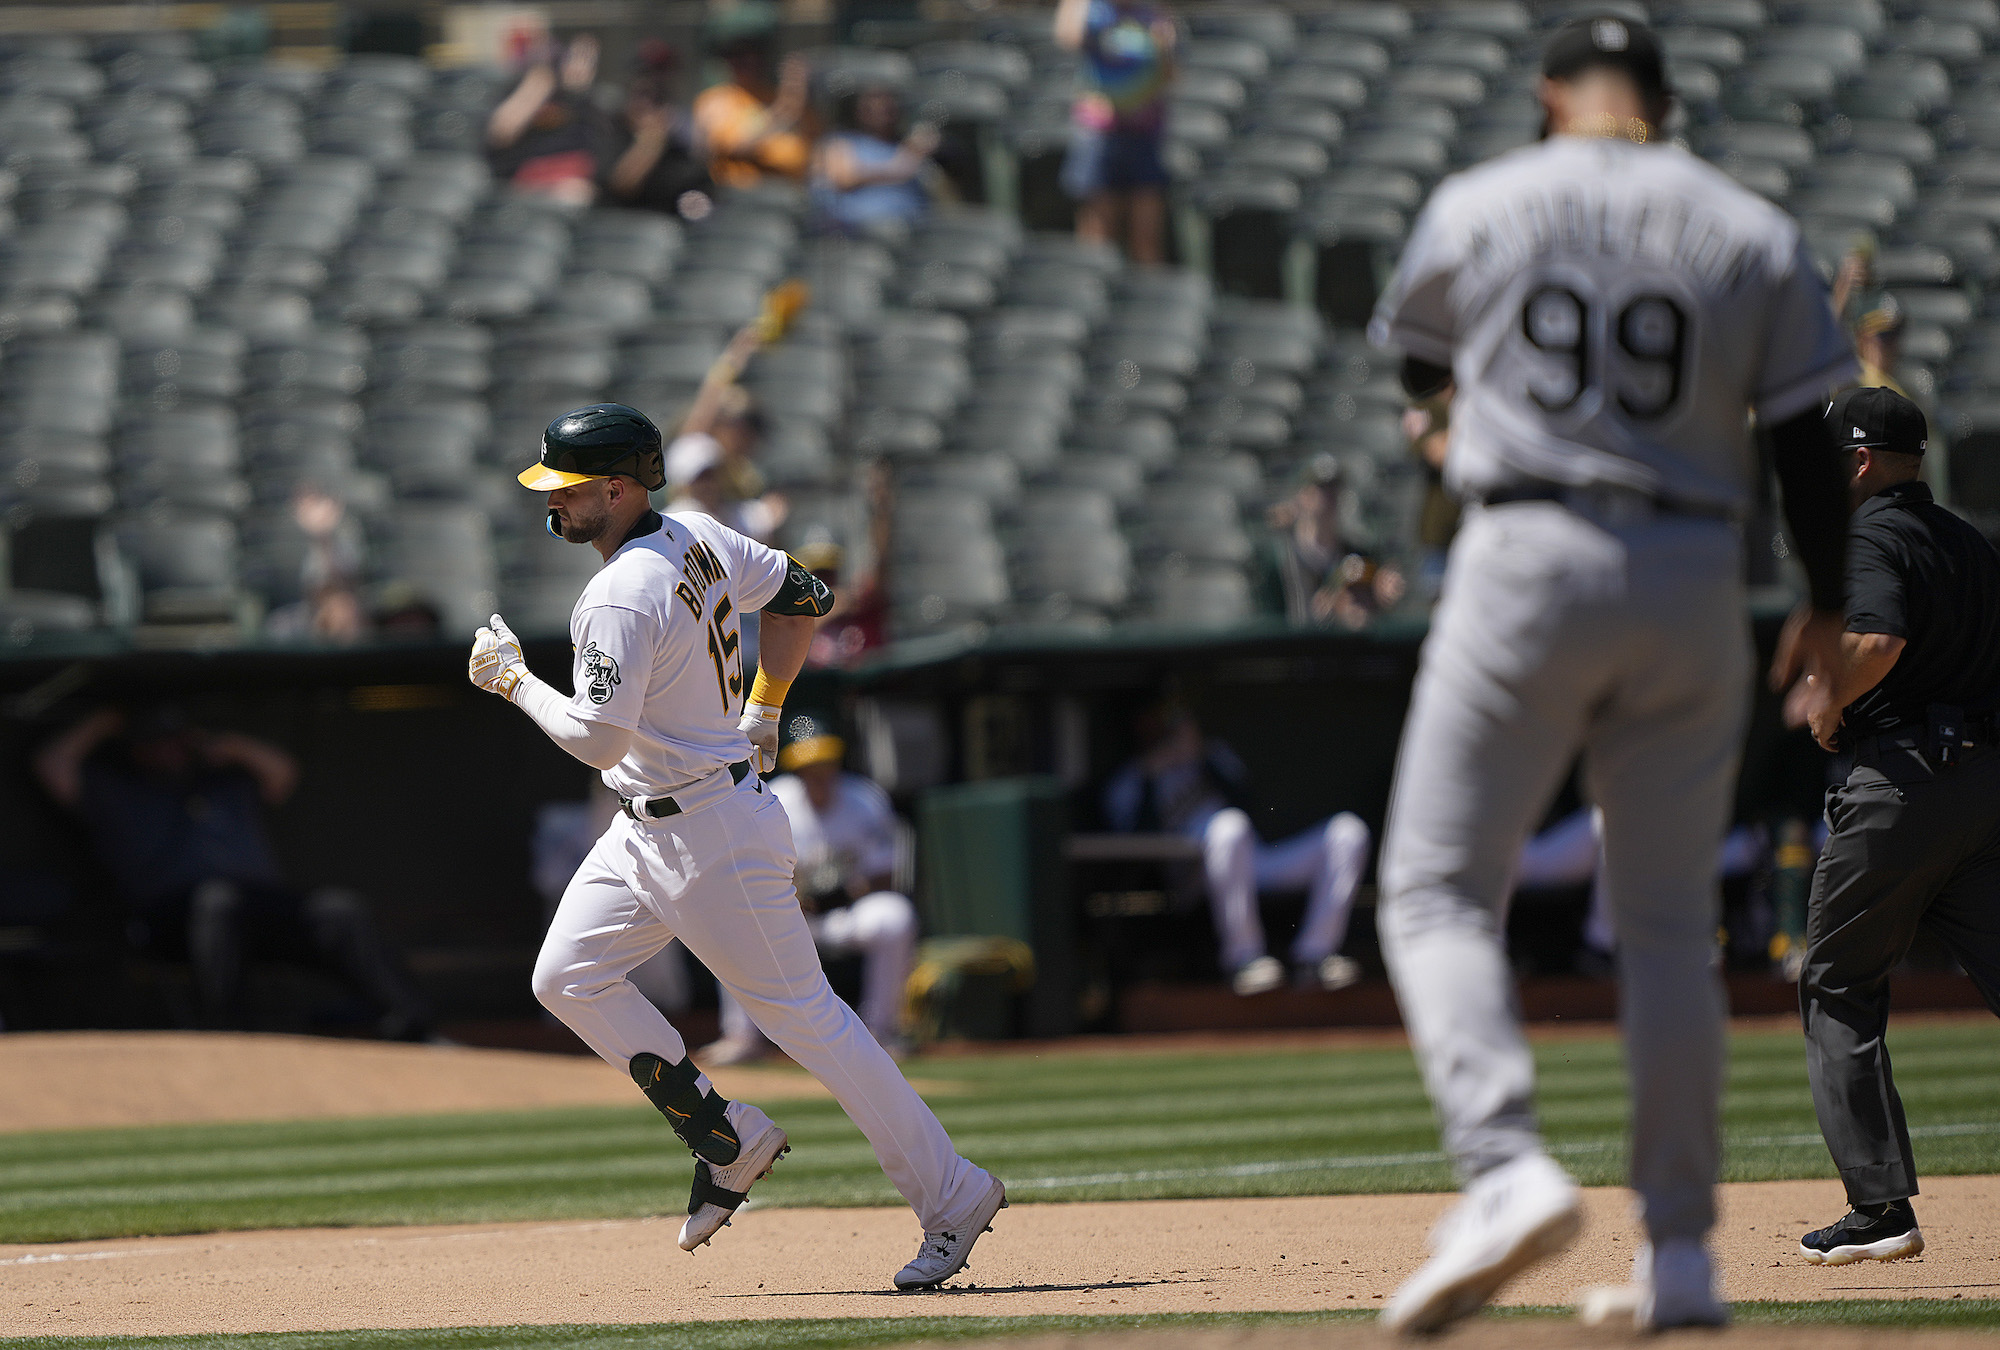 OAKLAND, CALIFORNIA - JULY 01: Seth Brown #15 of the Oakland Athletics trots around the bases after hitting a solo home run off Keynan Middleton #99 of the Chicago White Sox in the bottom of the seventh inning at RingCentral Coliseum on July 01, 2023 in Oakland, California. (Photo by Thearon W. Henderson/Getty Images)